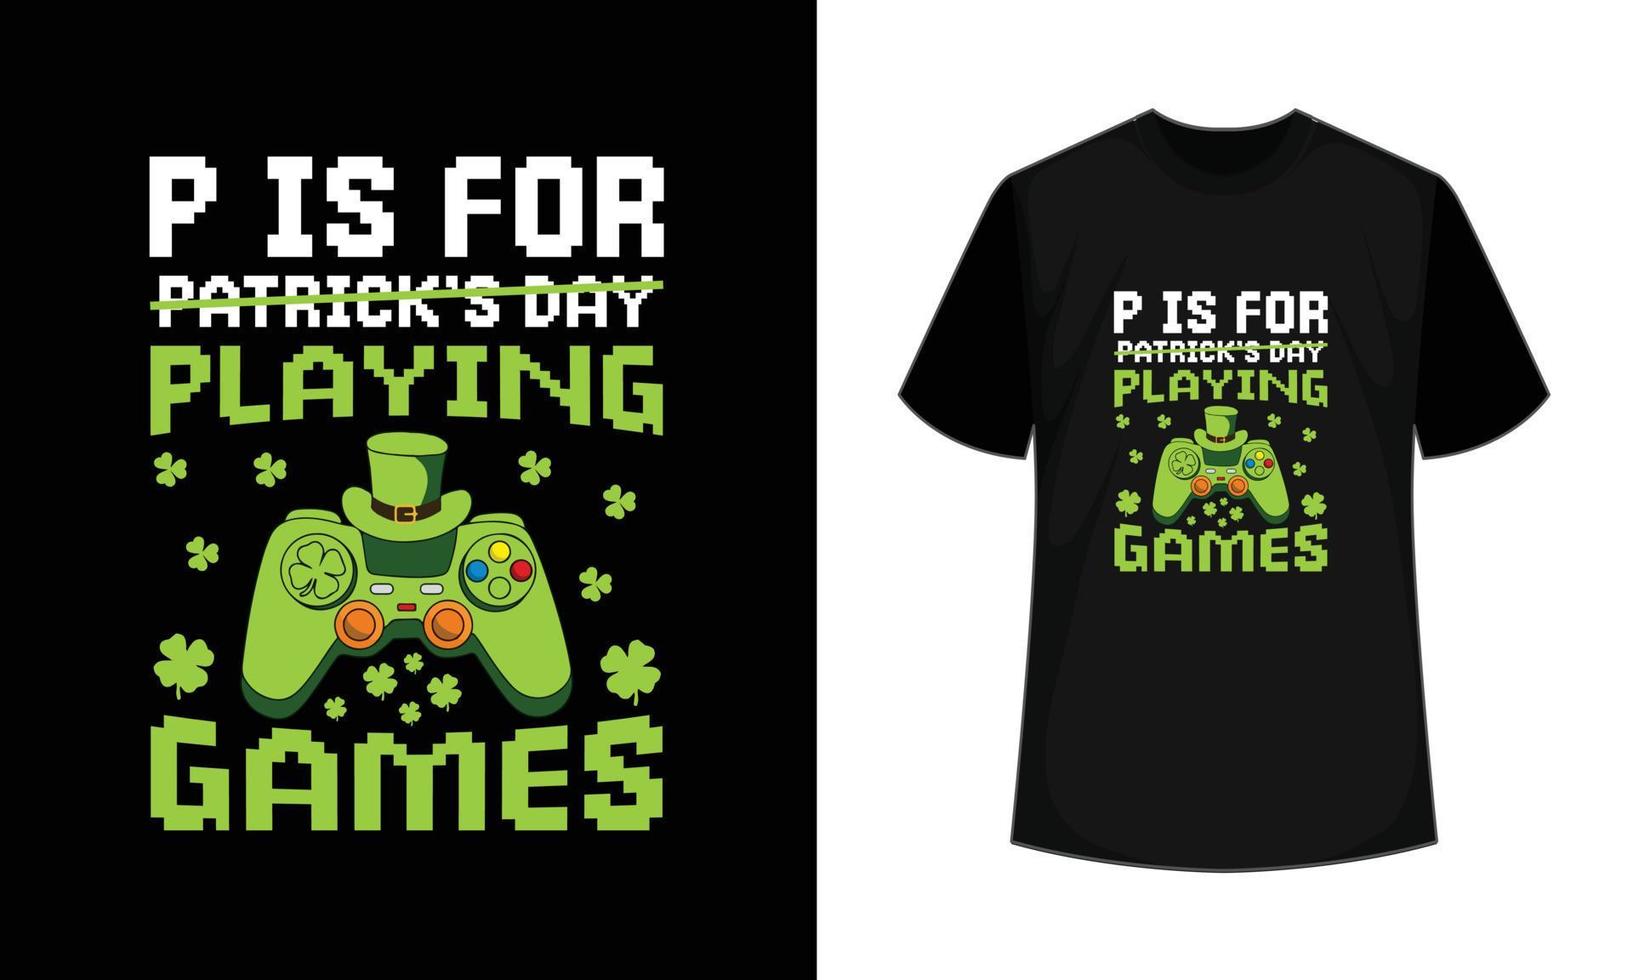 P is for patriicks day playing game T-Shirt Design vector